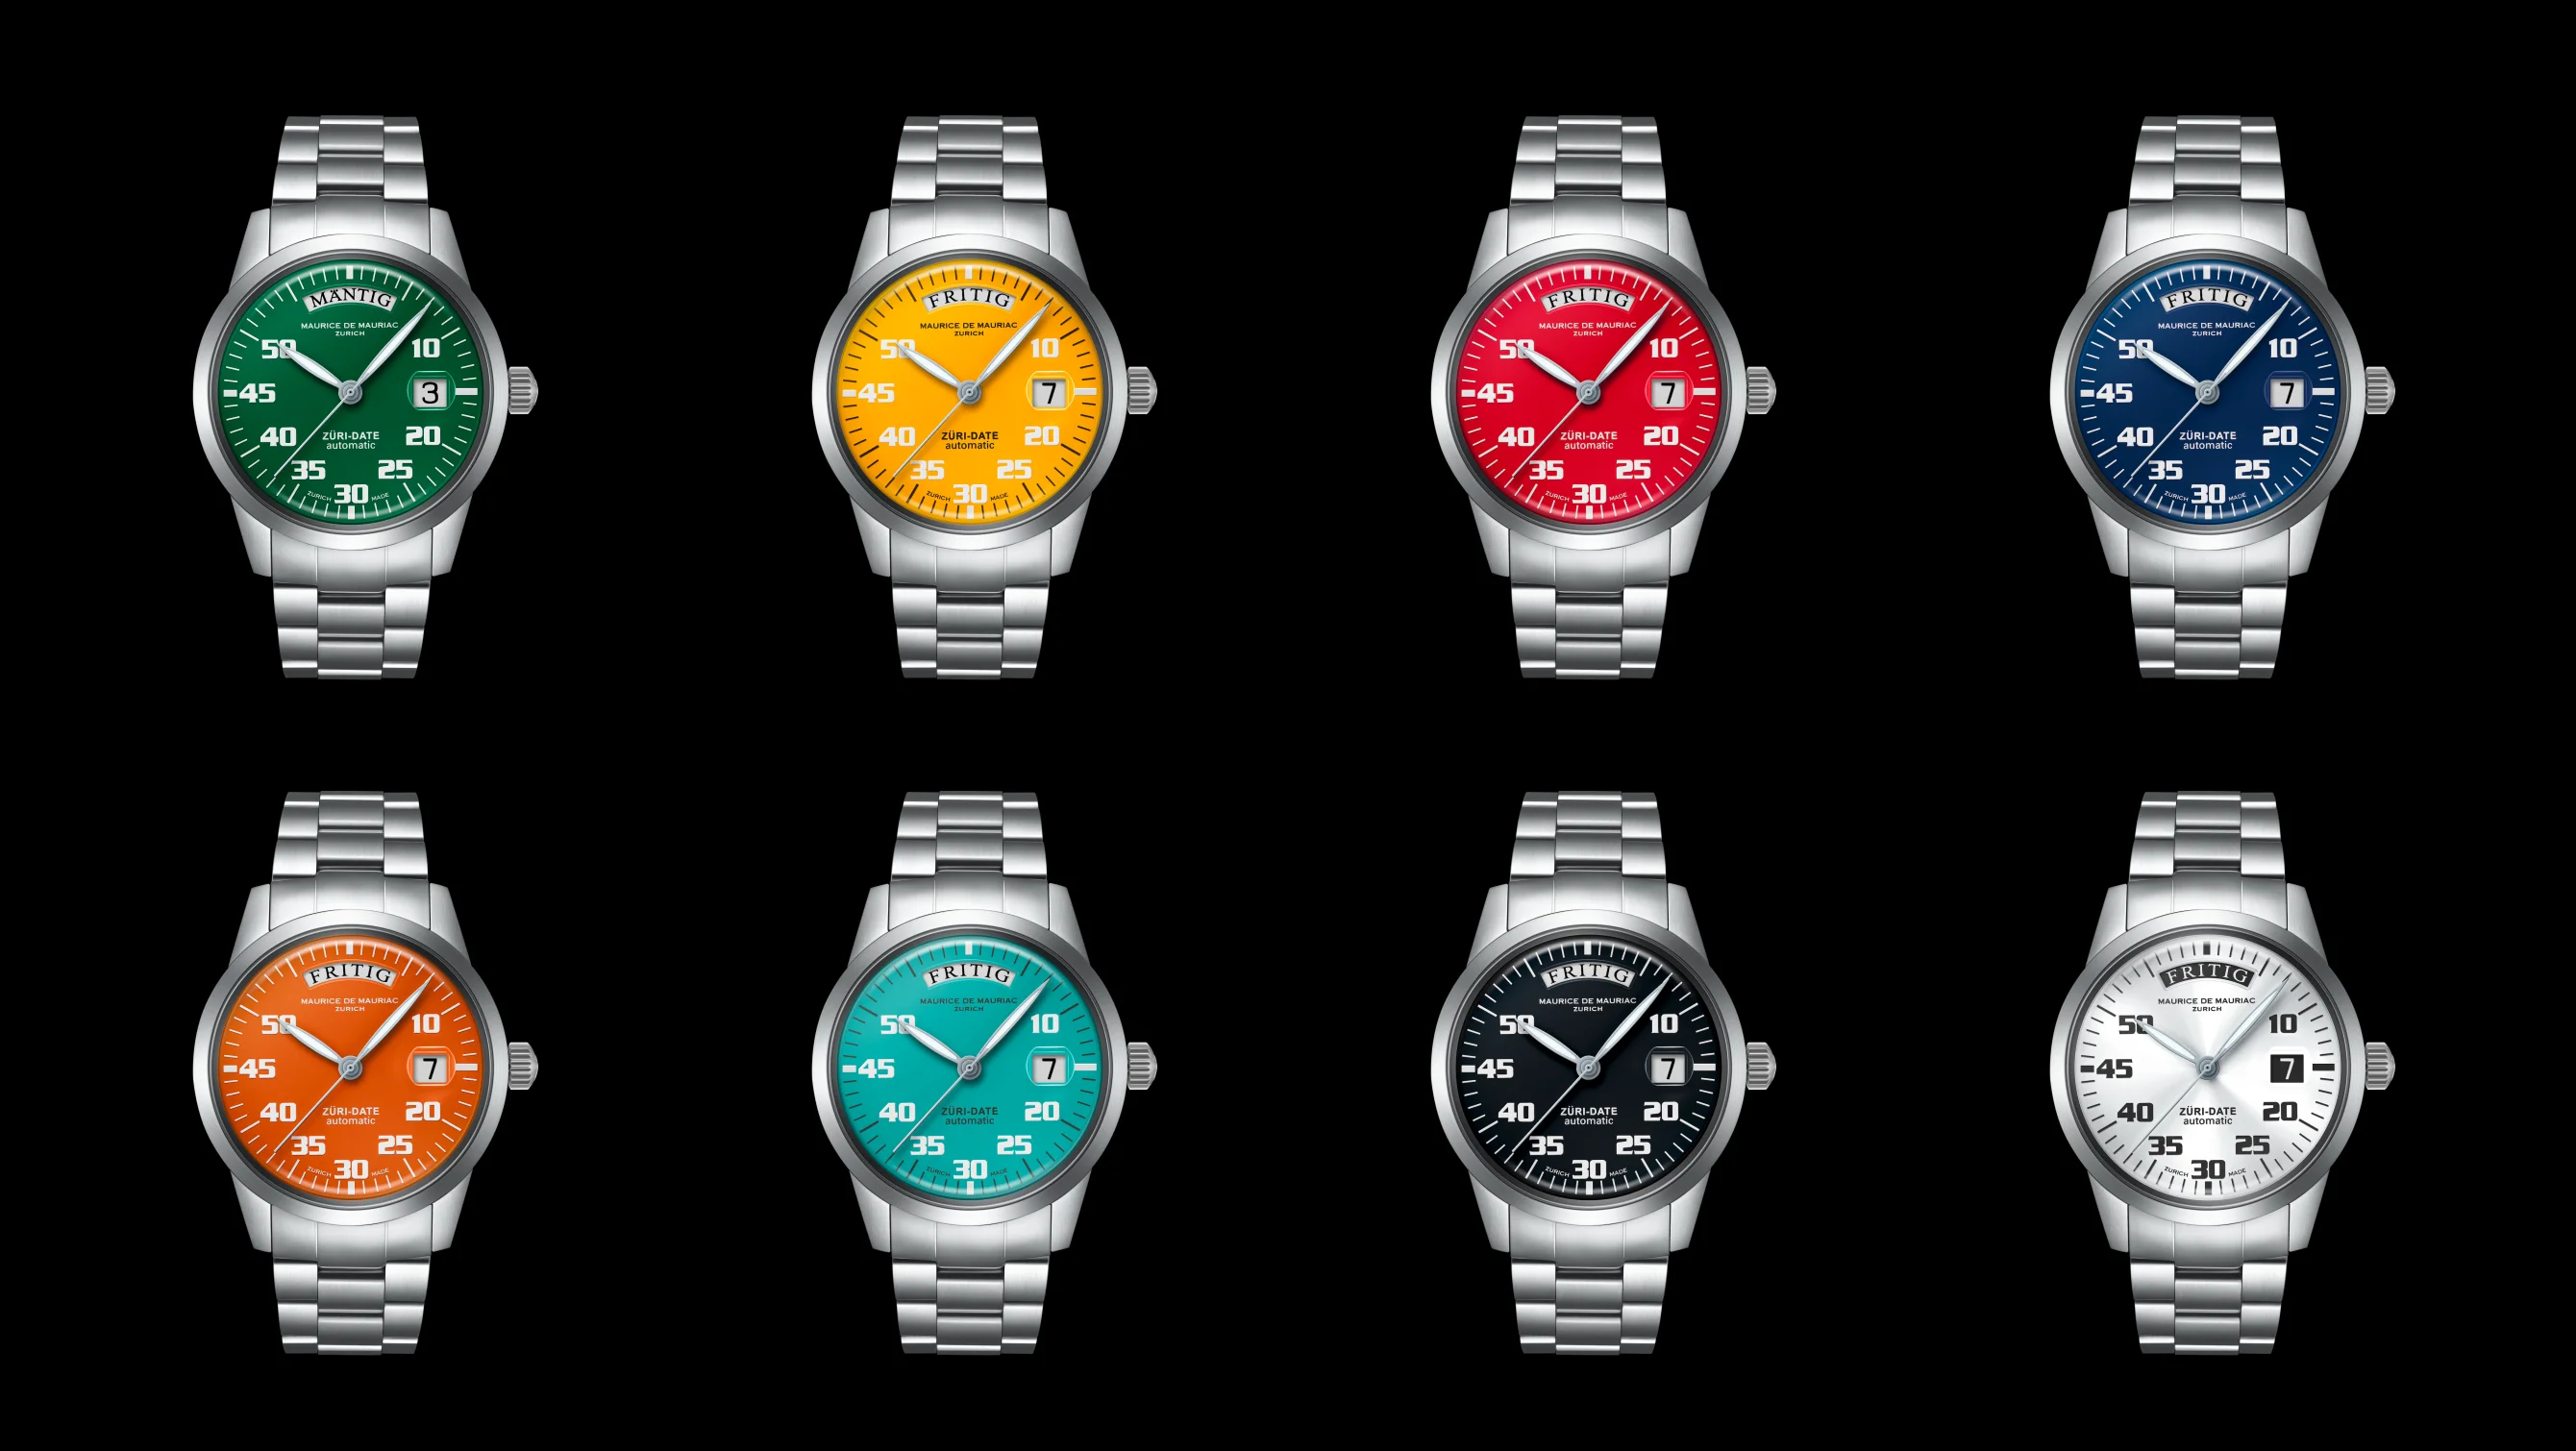 The new Maurice de Mauriac Züri Date collection offers a rainbow of 8 watches inspired by the colours of Zurich tram lines